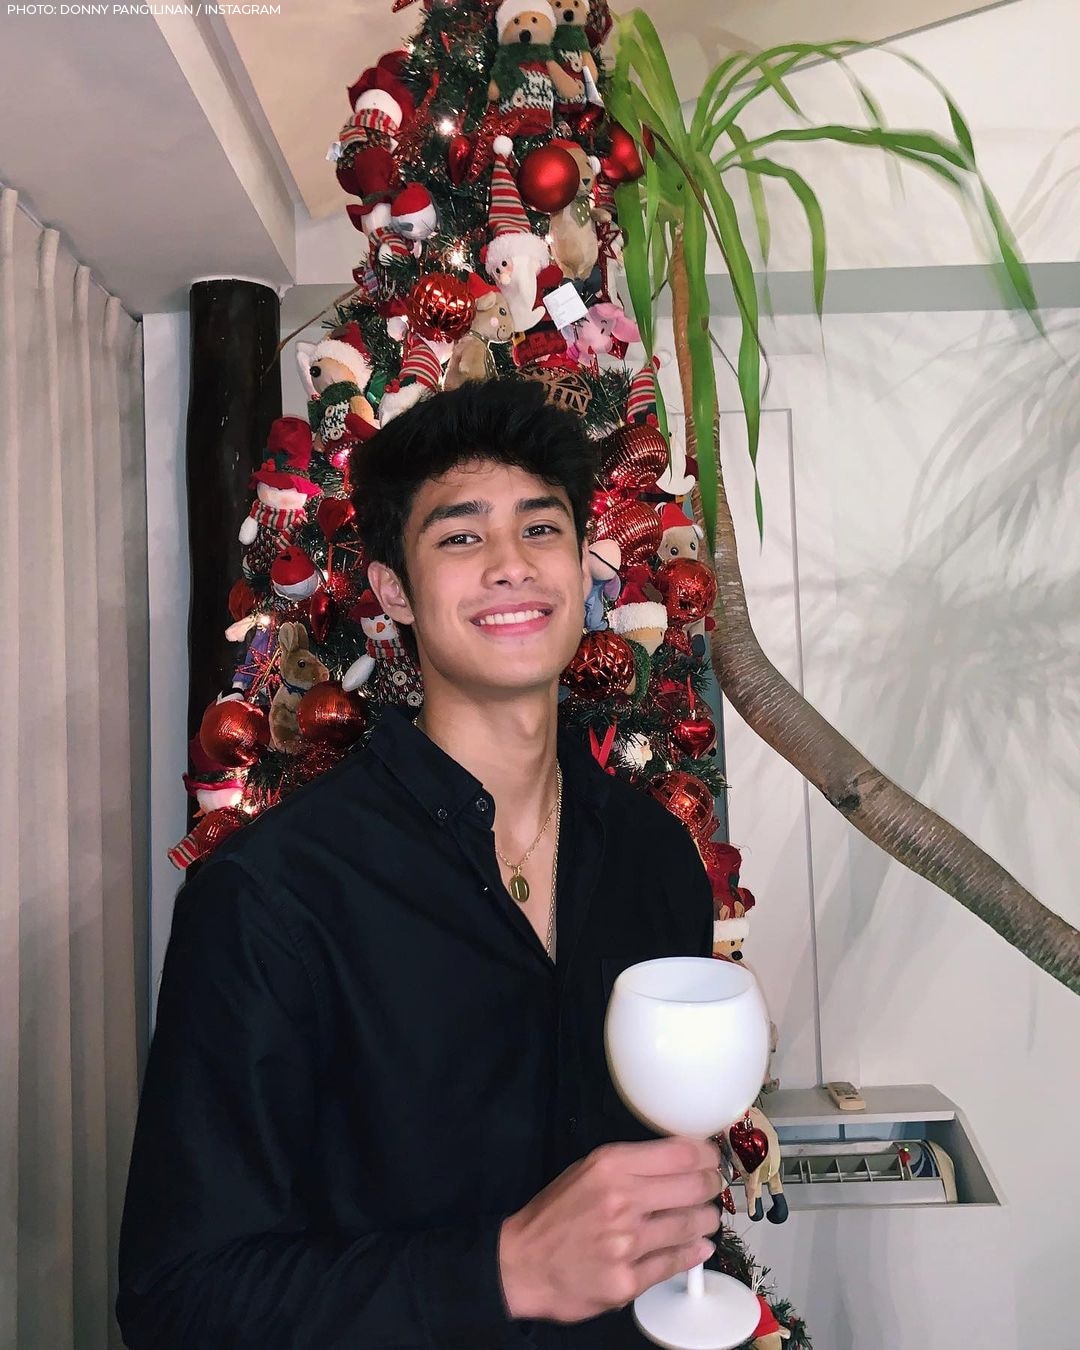 photo of Donny Pangilinan that prove he's the perfect Deib Lohr in 'He's Into Her'